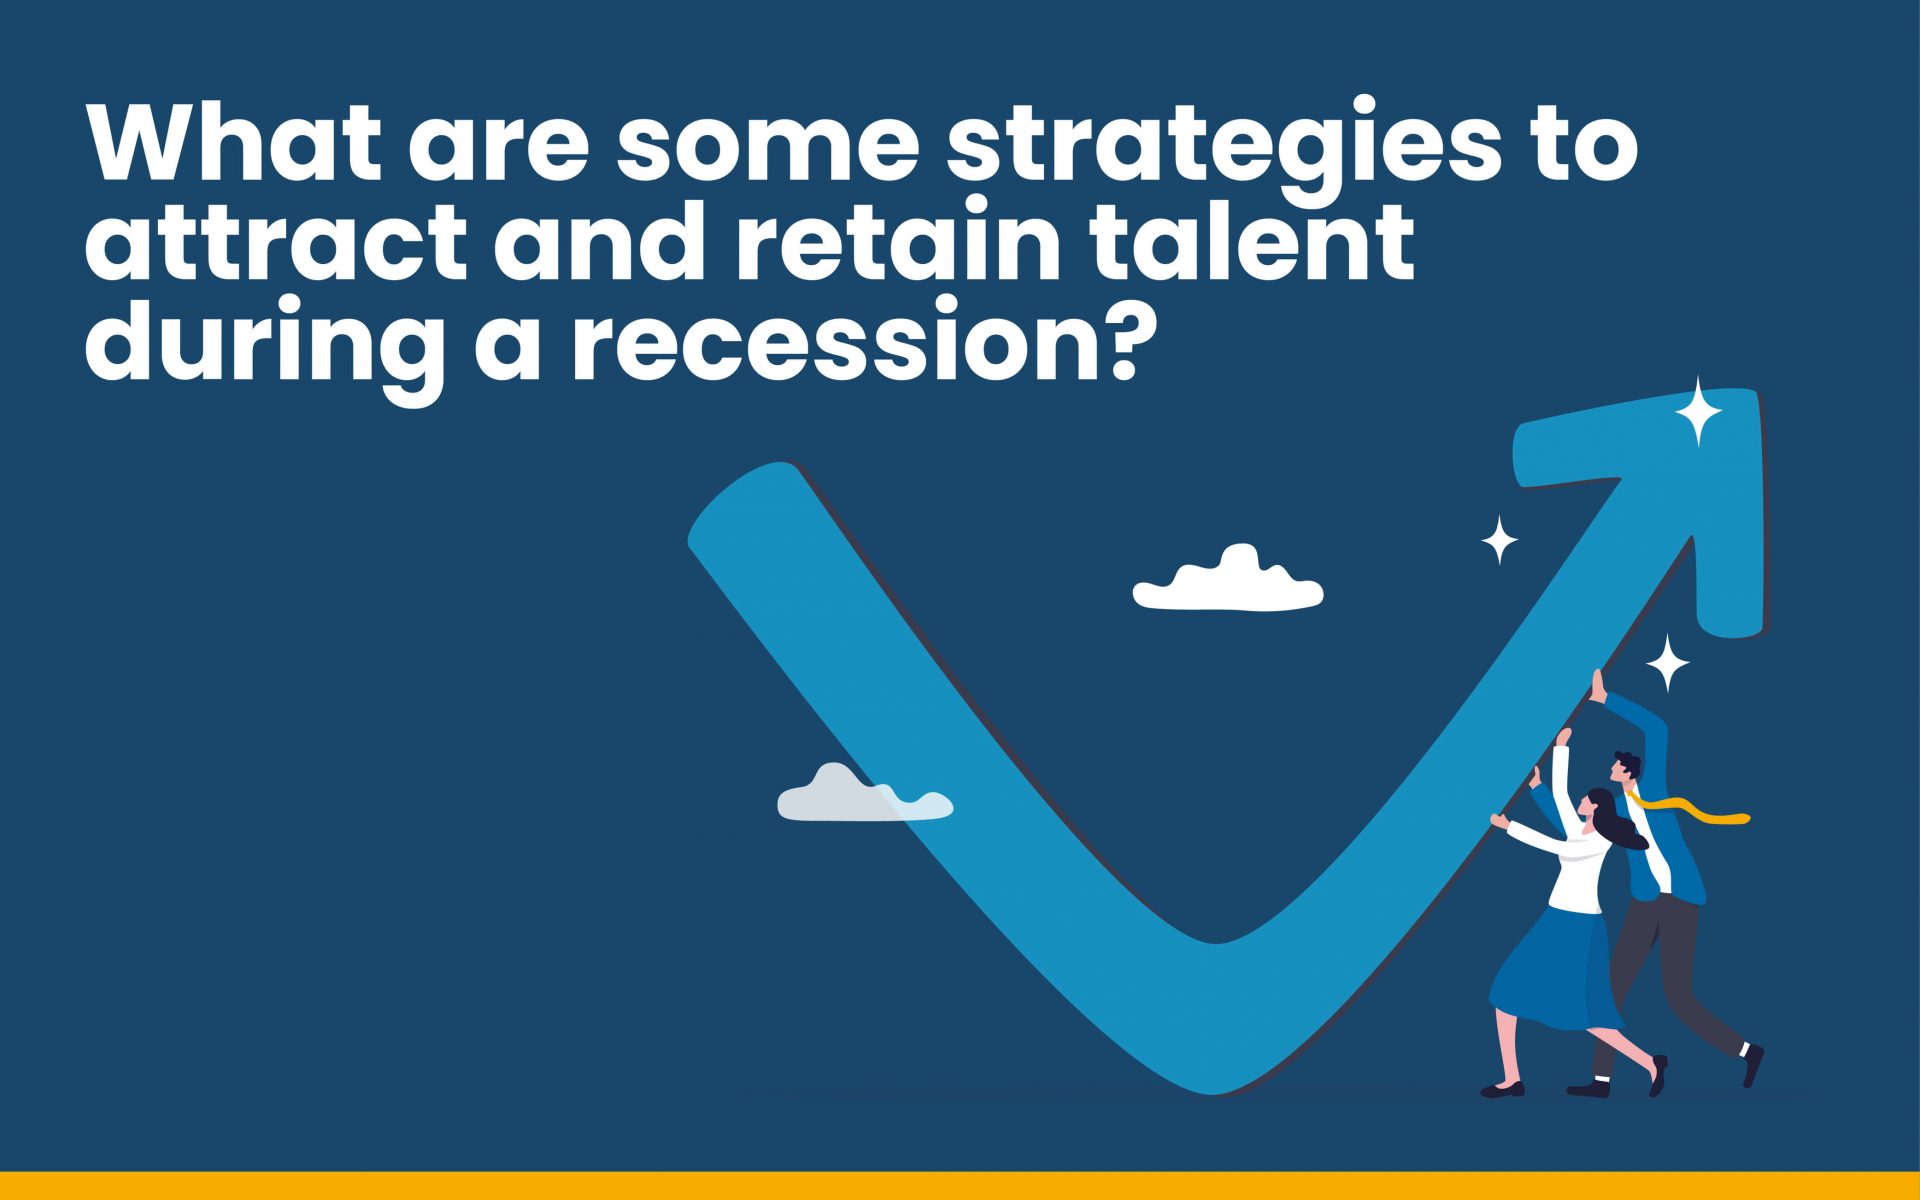 What are the strategies to attract and retain talent during a recession?